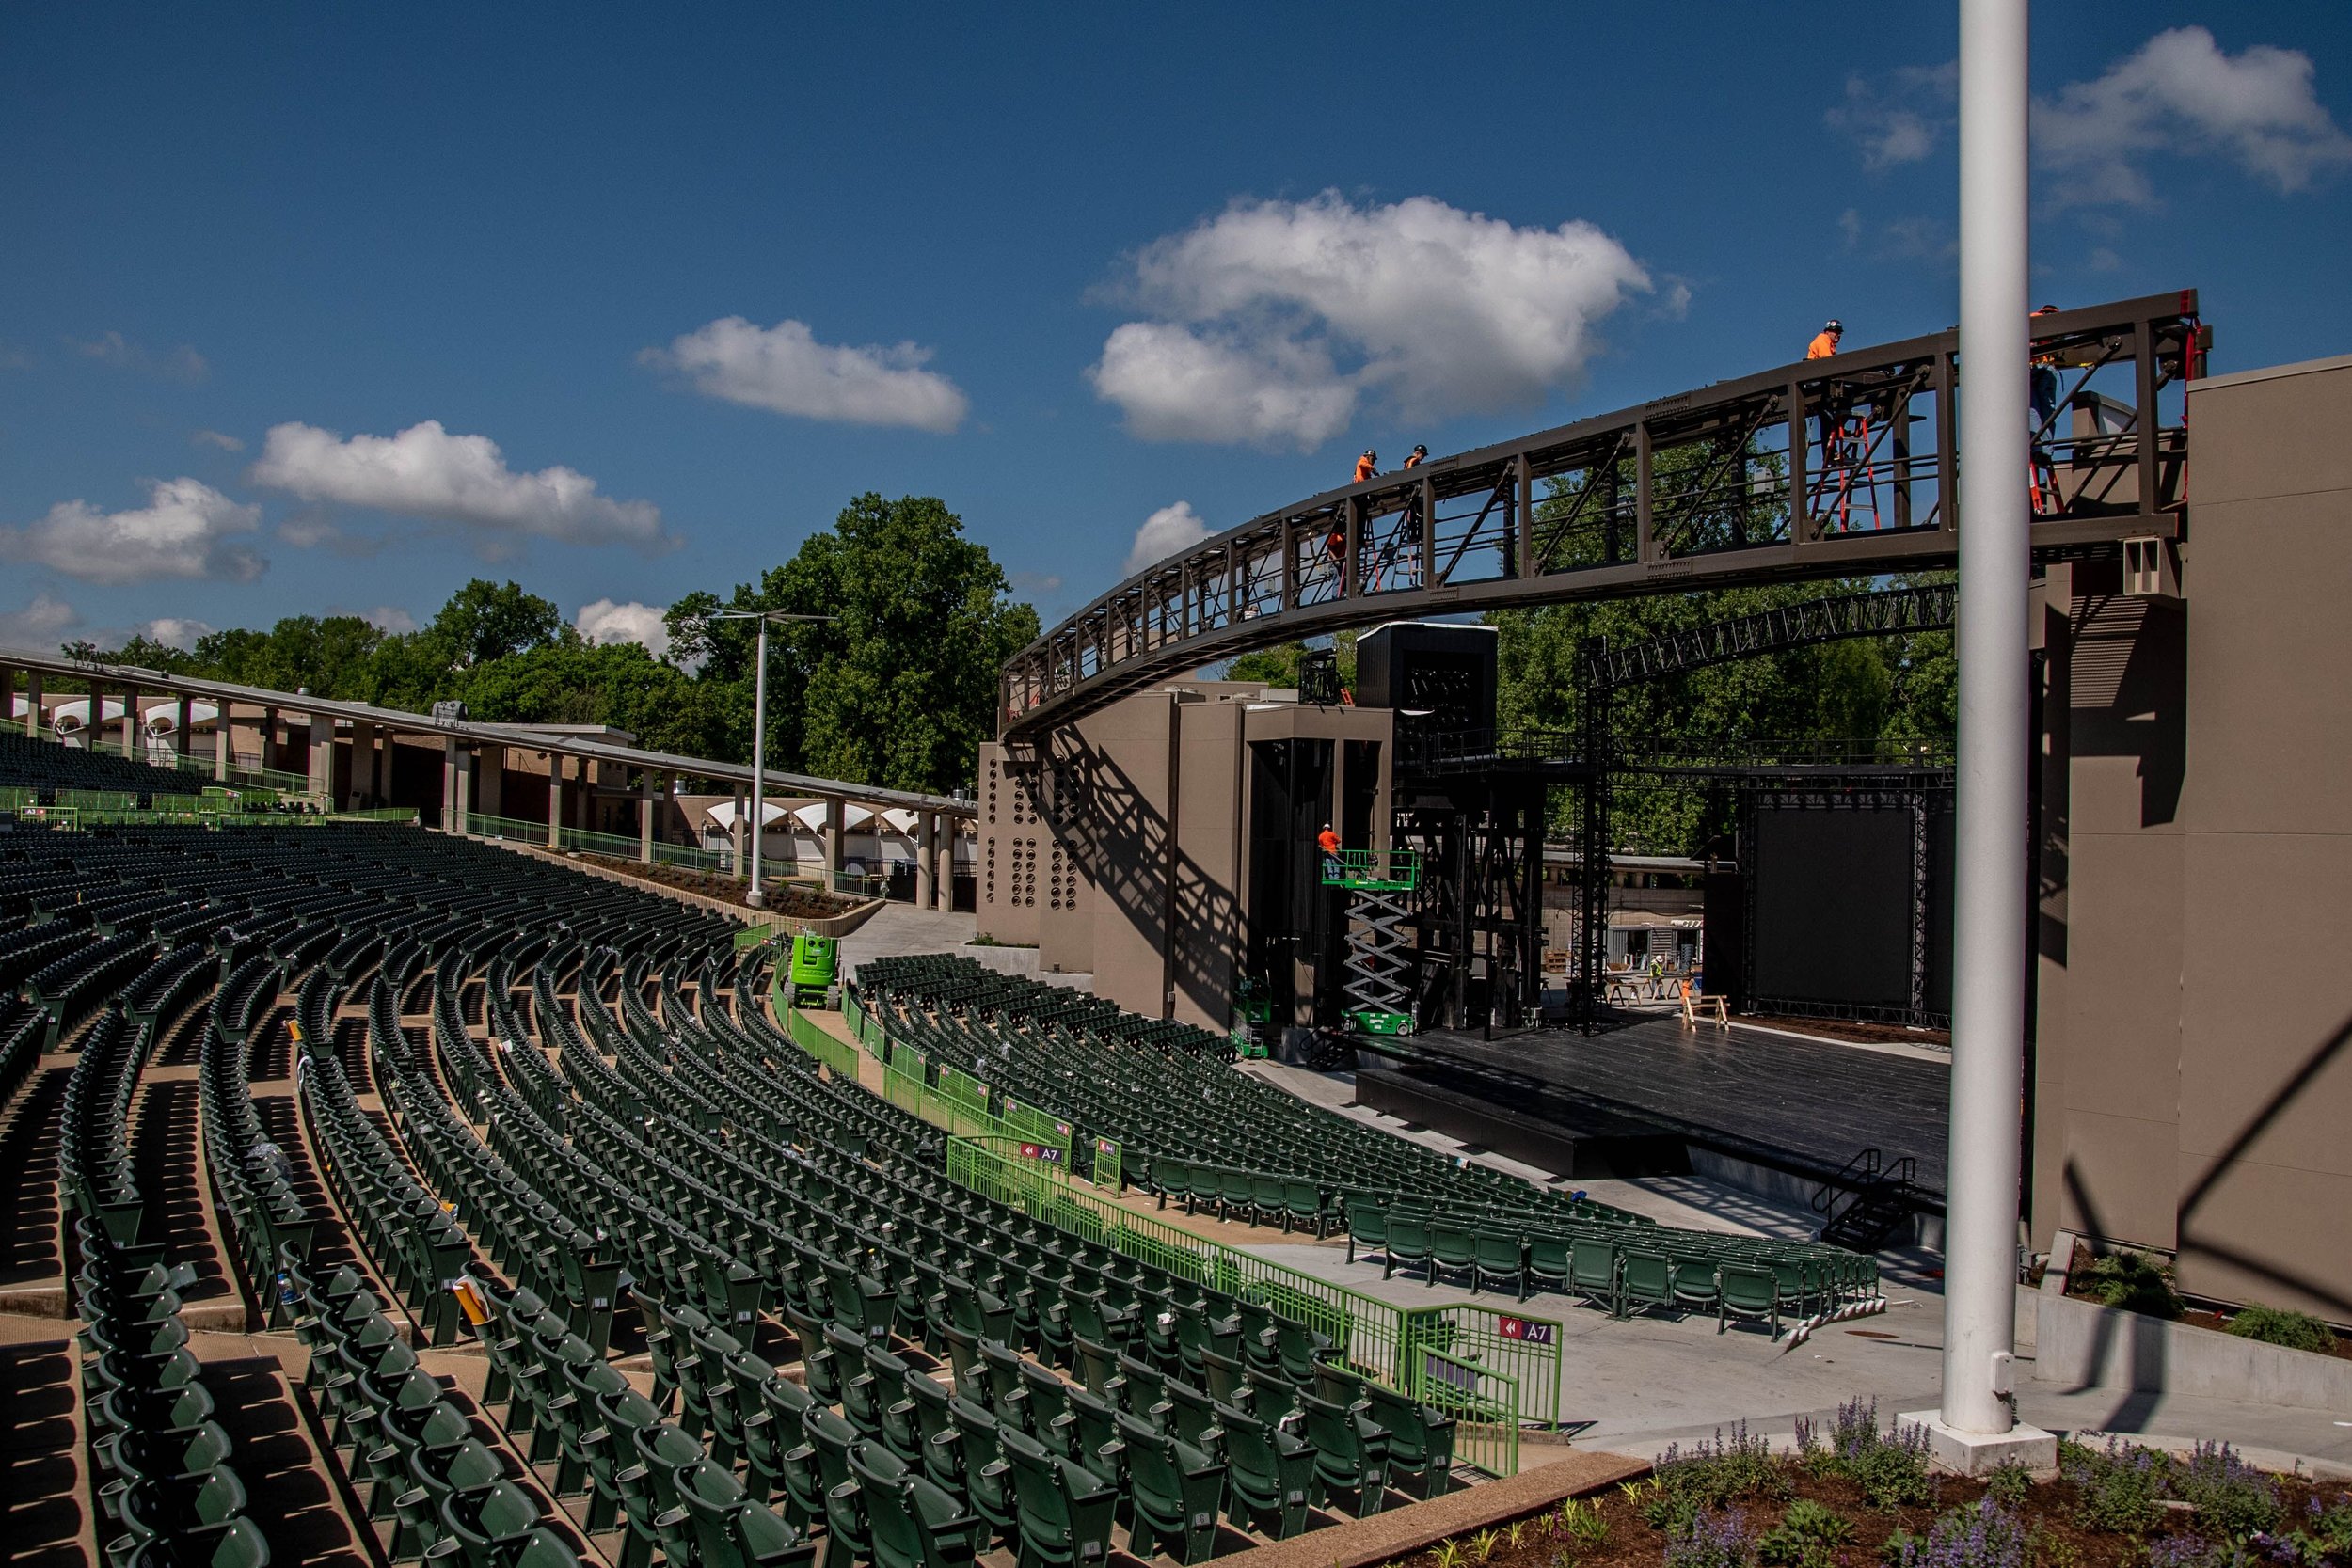 The Muny St Louis Mo Seating Chart